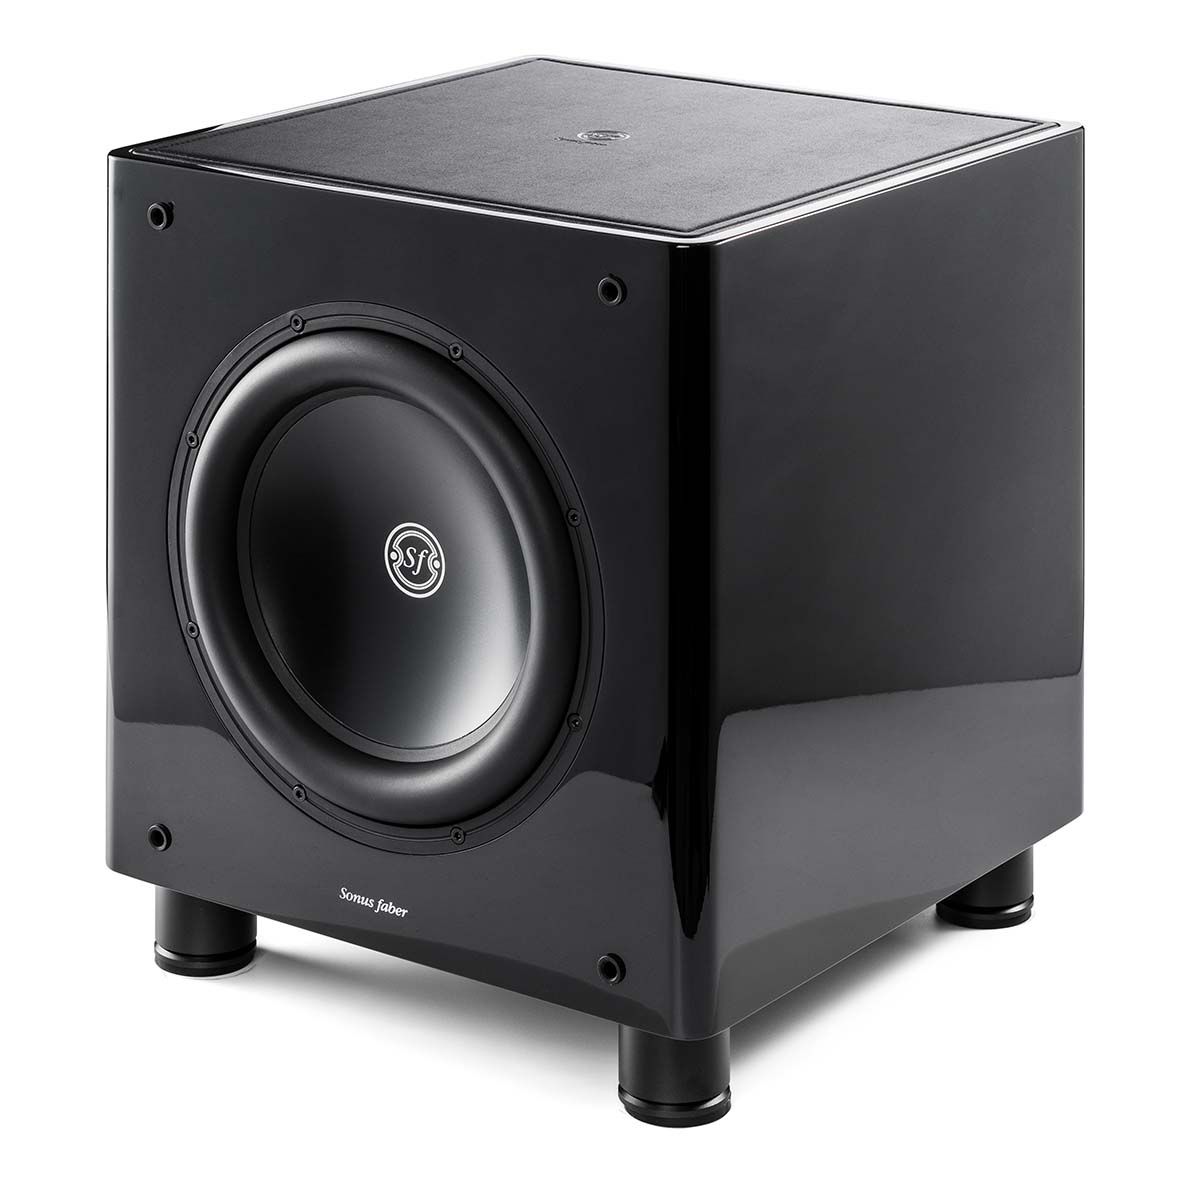 Sonus Faber Gravis II 10" Powered Subwoofer black angled front view without grille